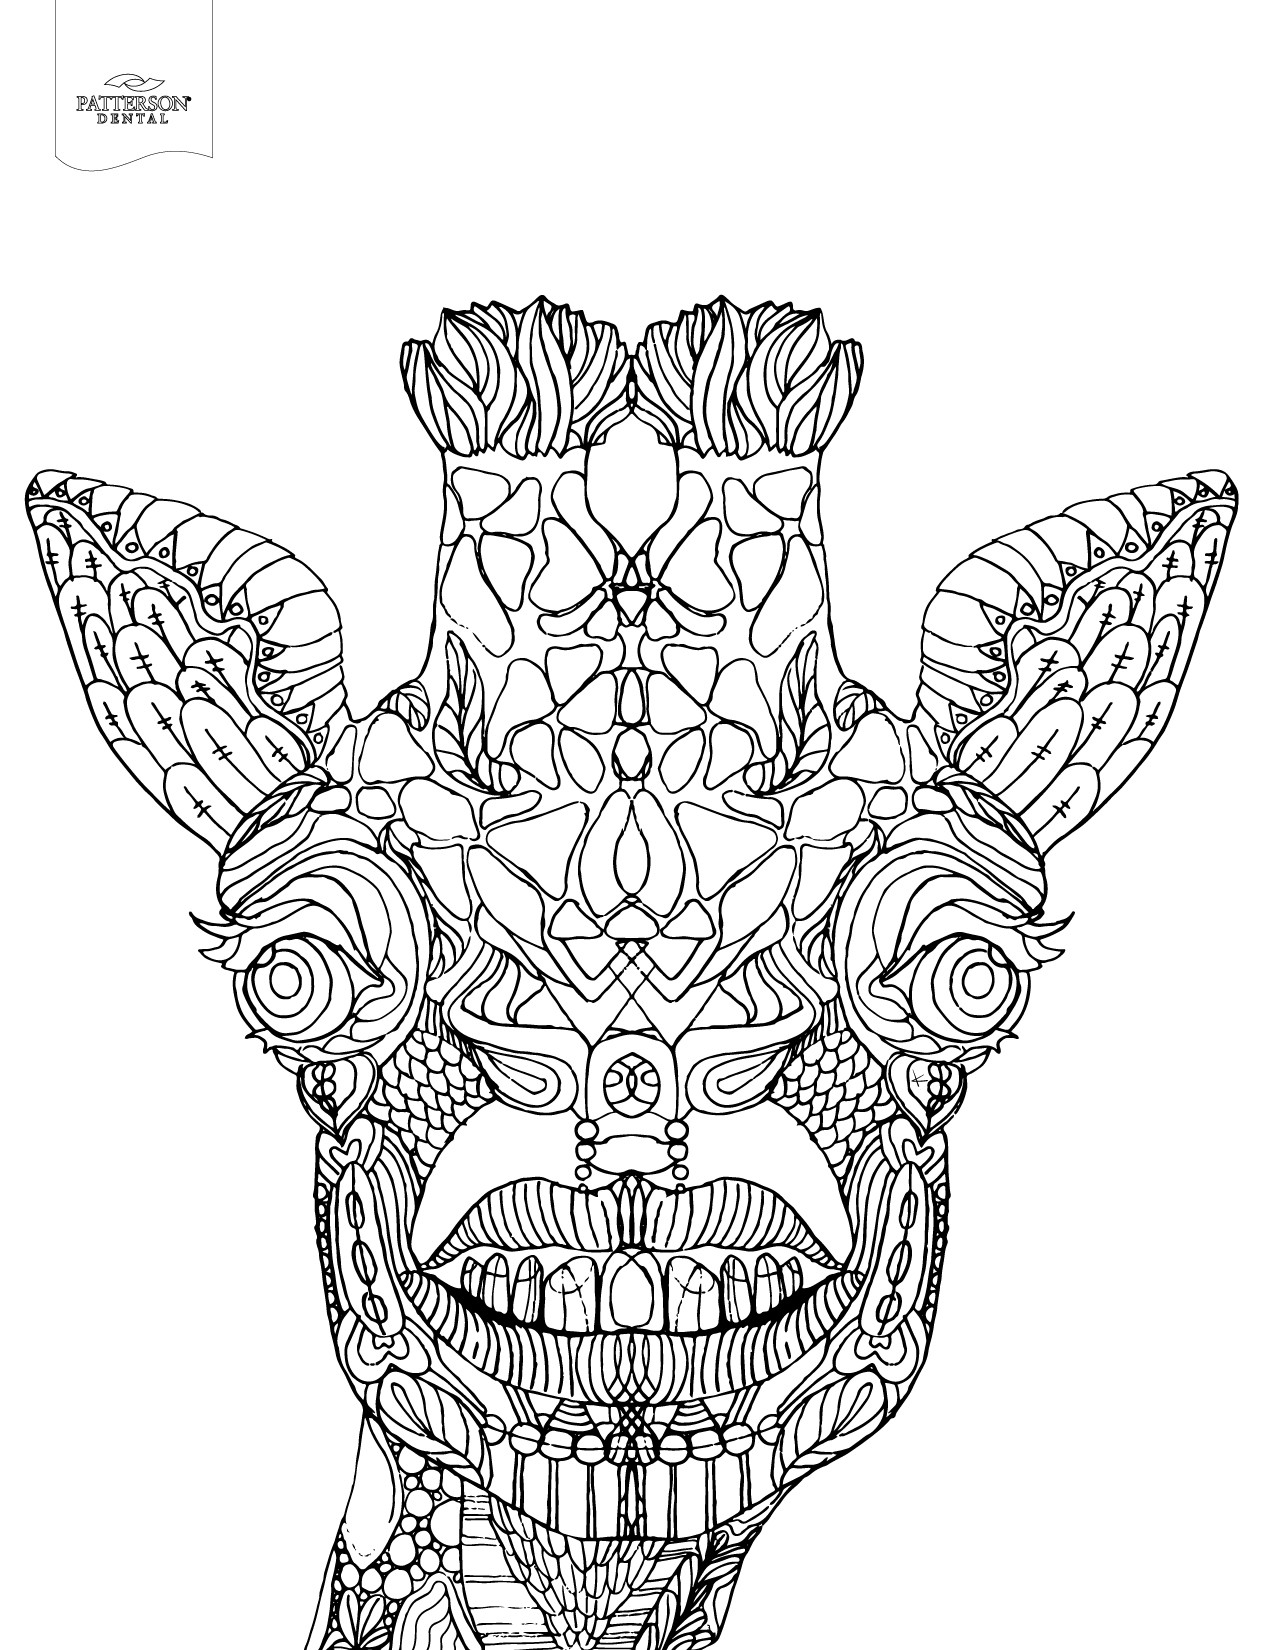 Adult Coloring Book Images
 10 Toothy Adult Coloring Pages [Printable] f the Cusp